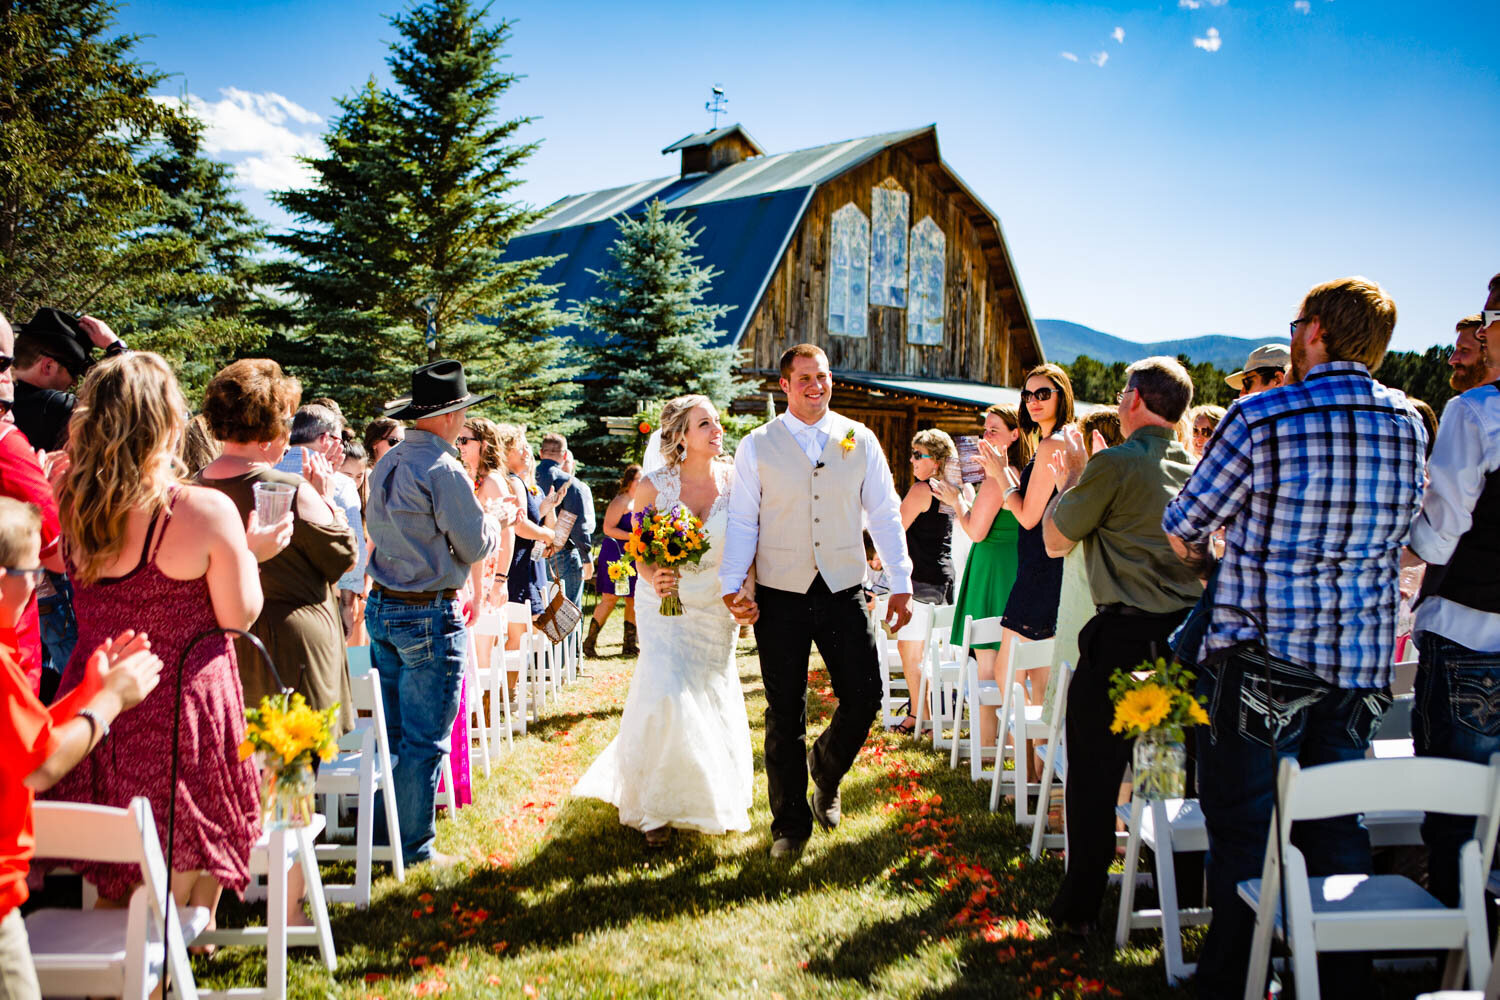  Wedding ceremony at the barn at evergreen memorial park, photographed by JMGant Photography 